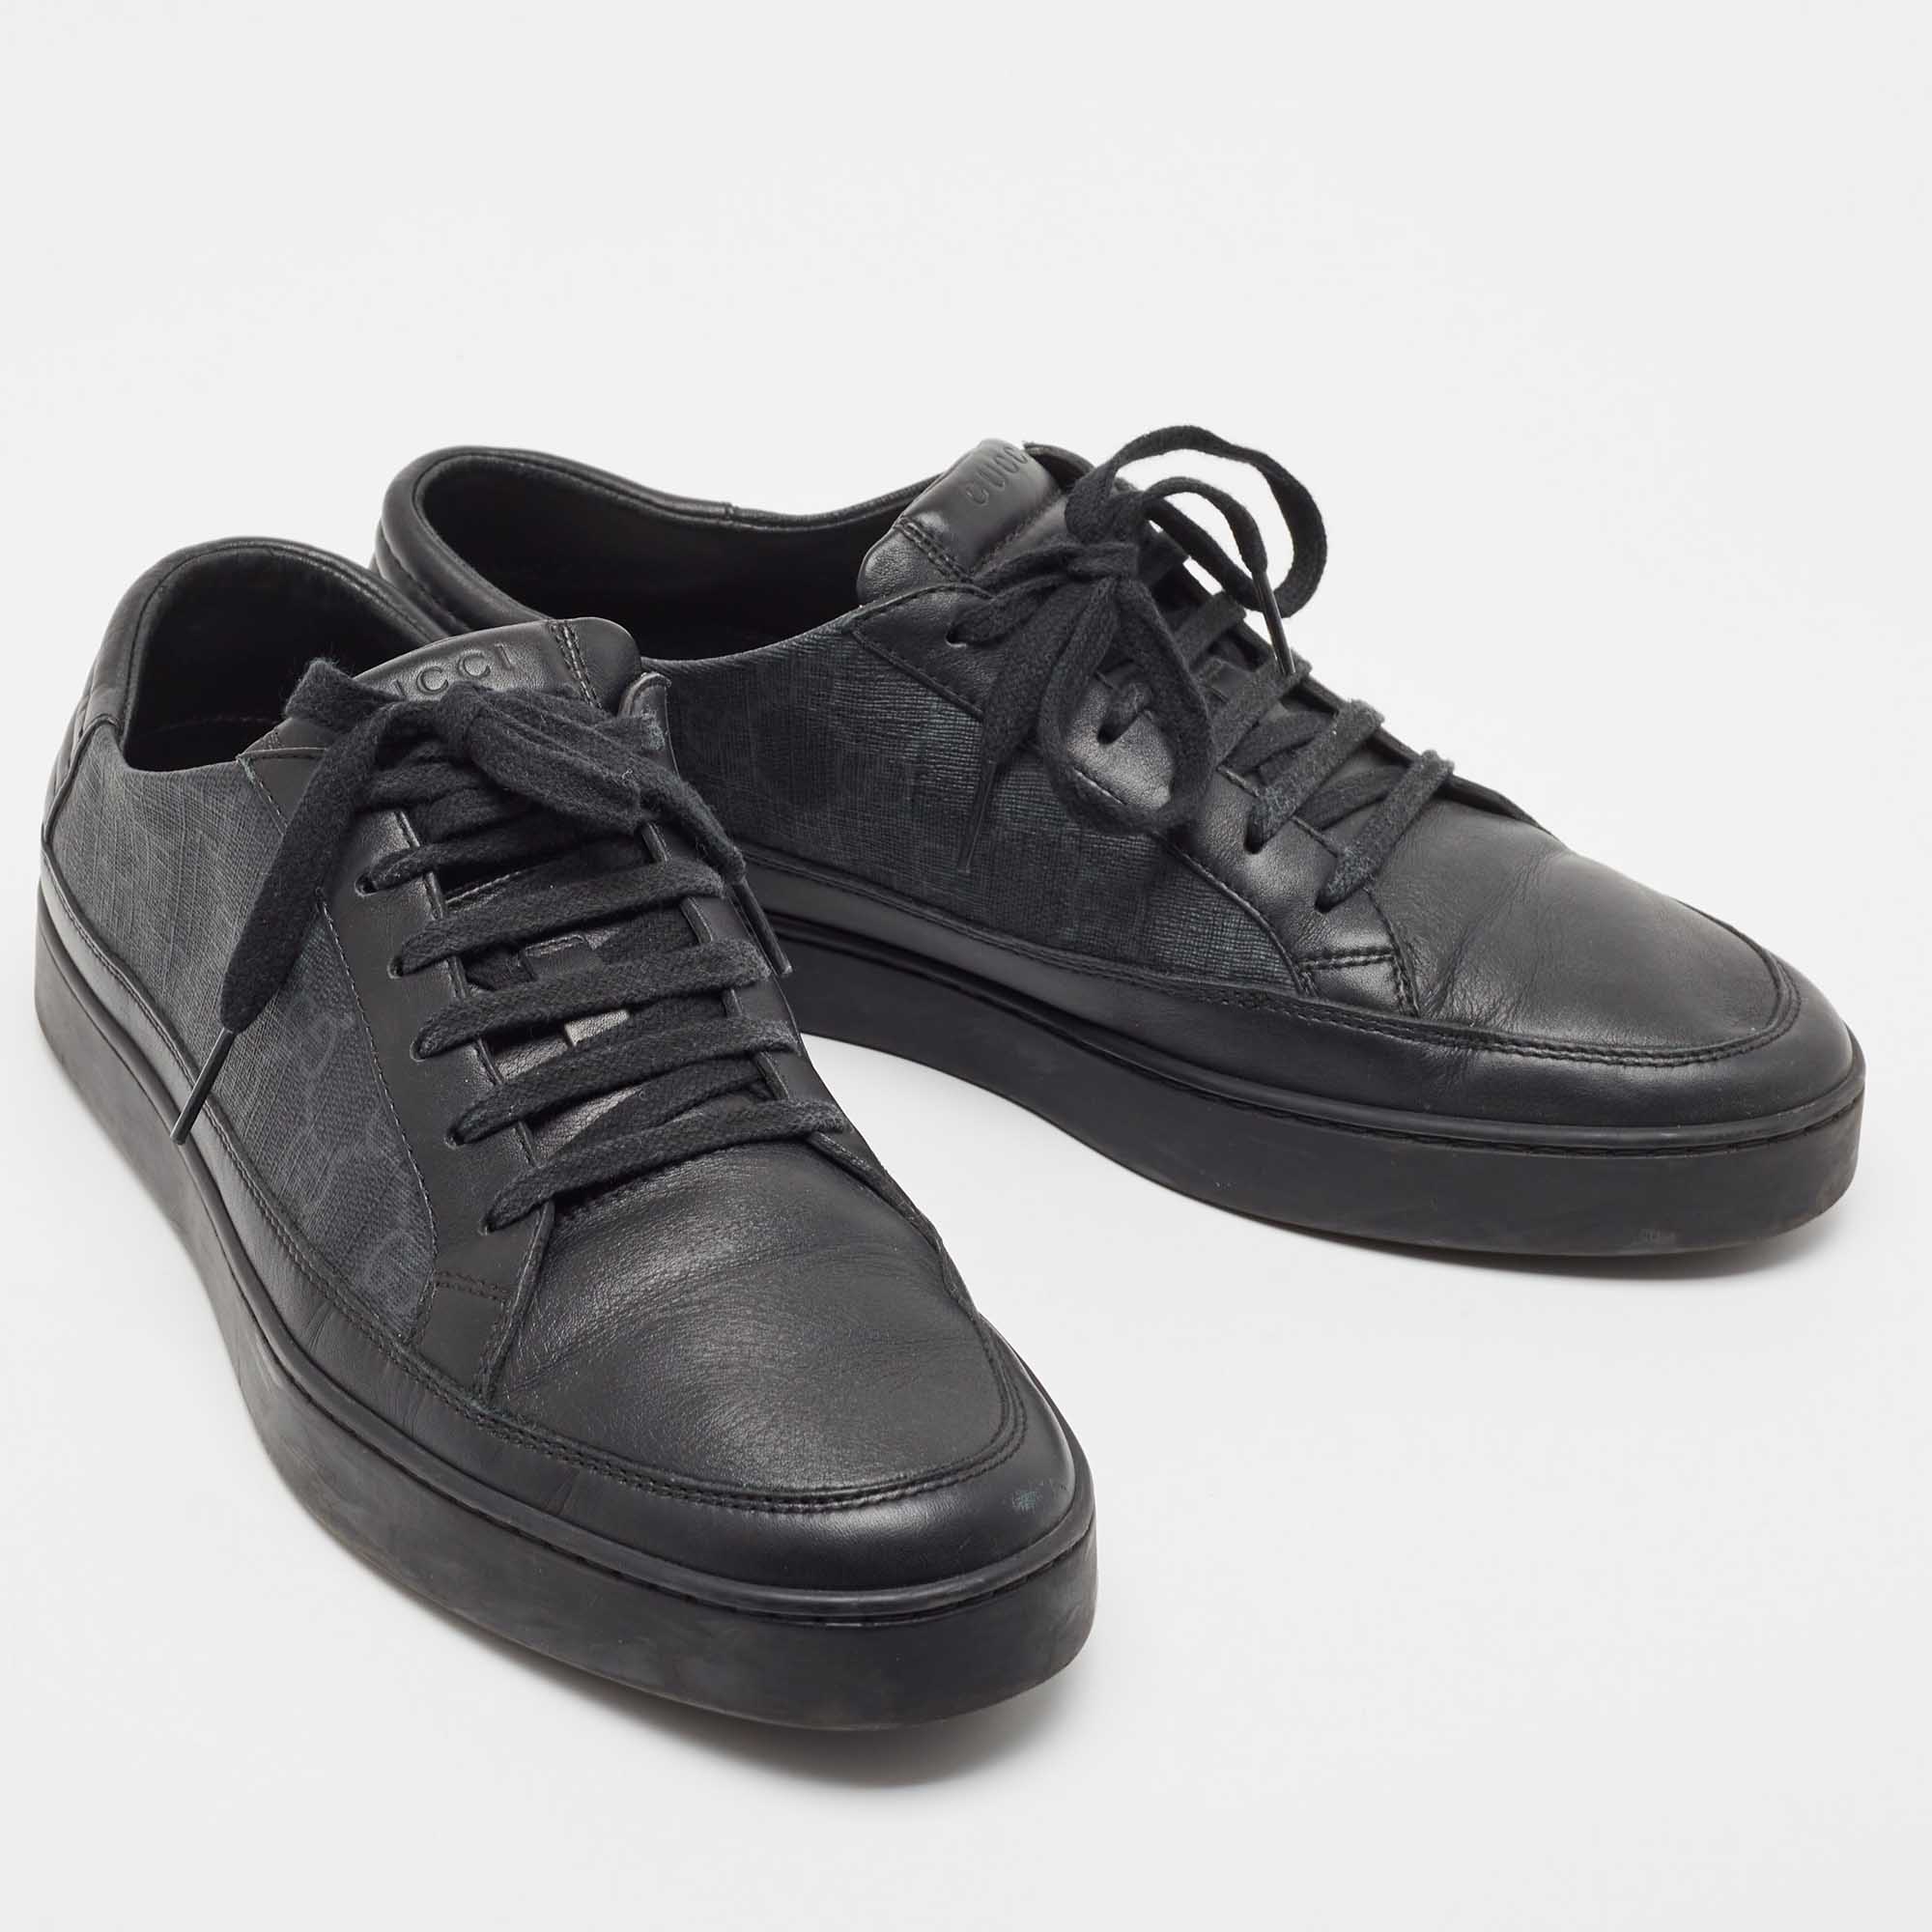 Gucci Black Leather And GG Supreme Canvas Low Top Sneakers Size 43